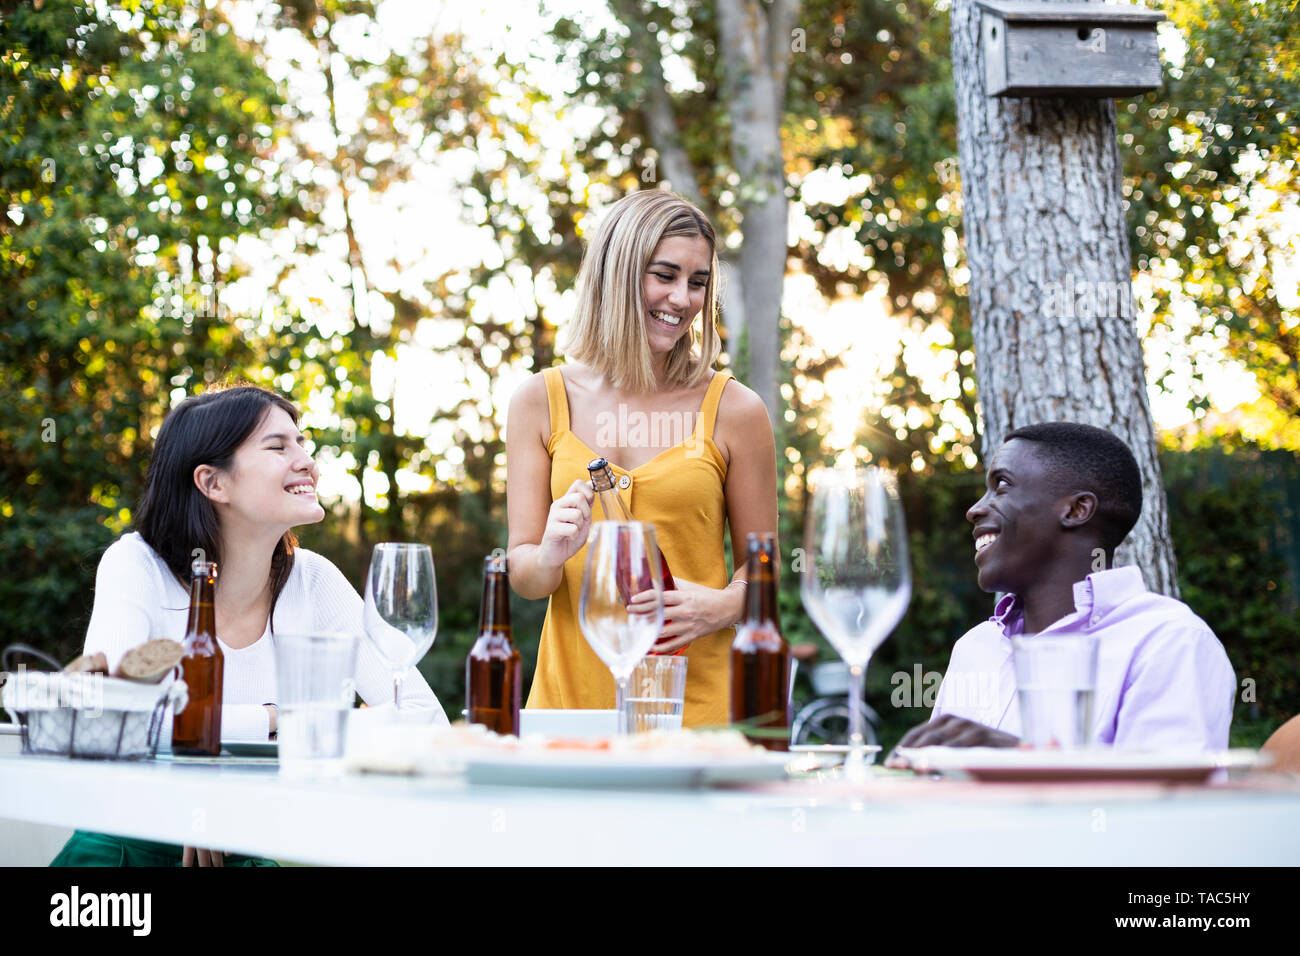 Friends at a summer dinner in the garden opening bottle of wine Stock Photo